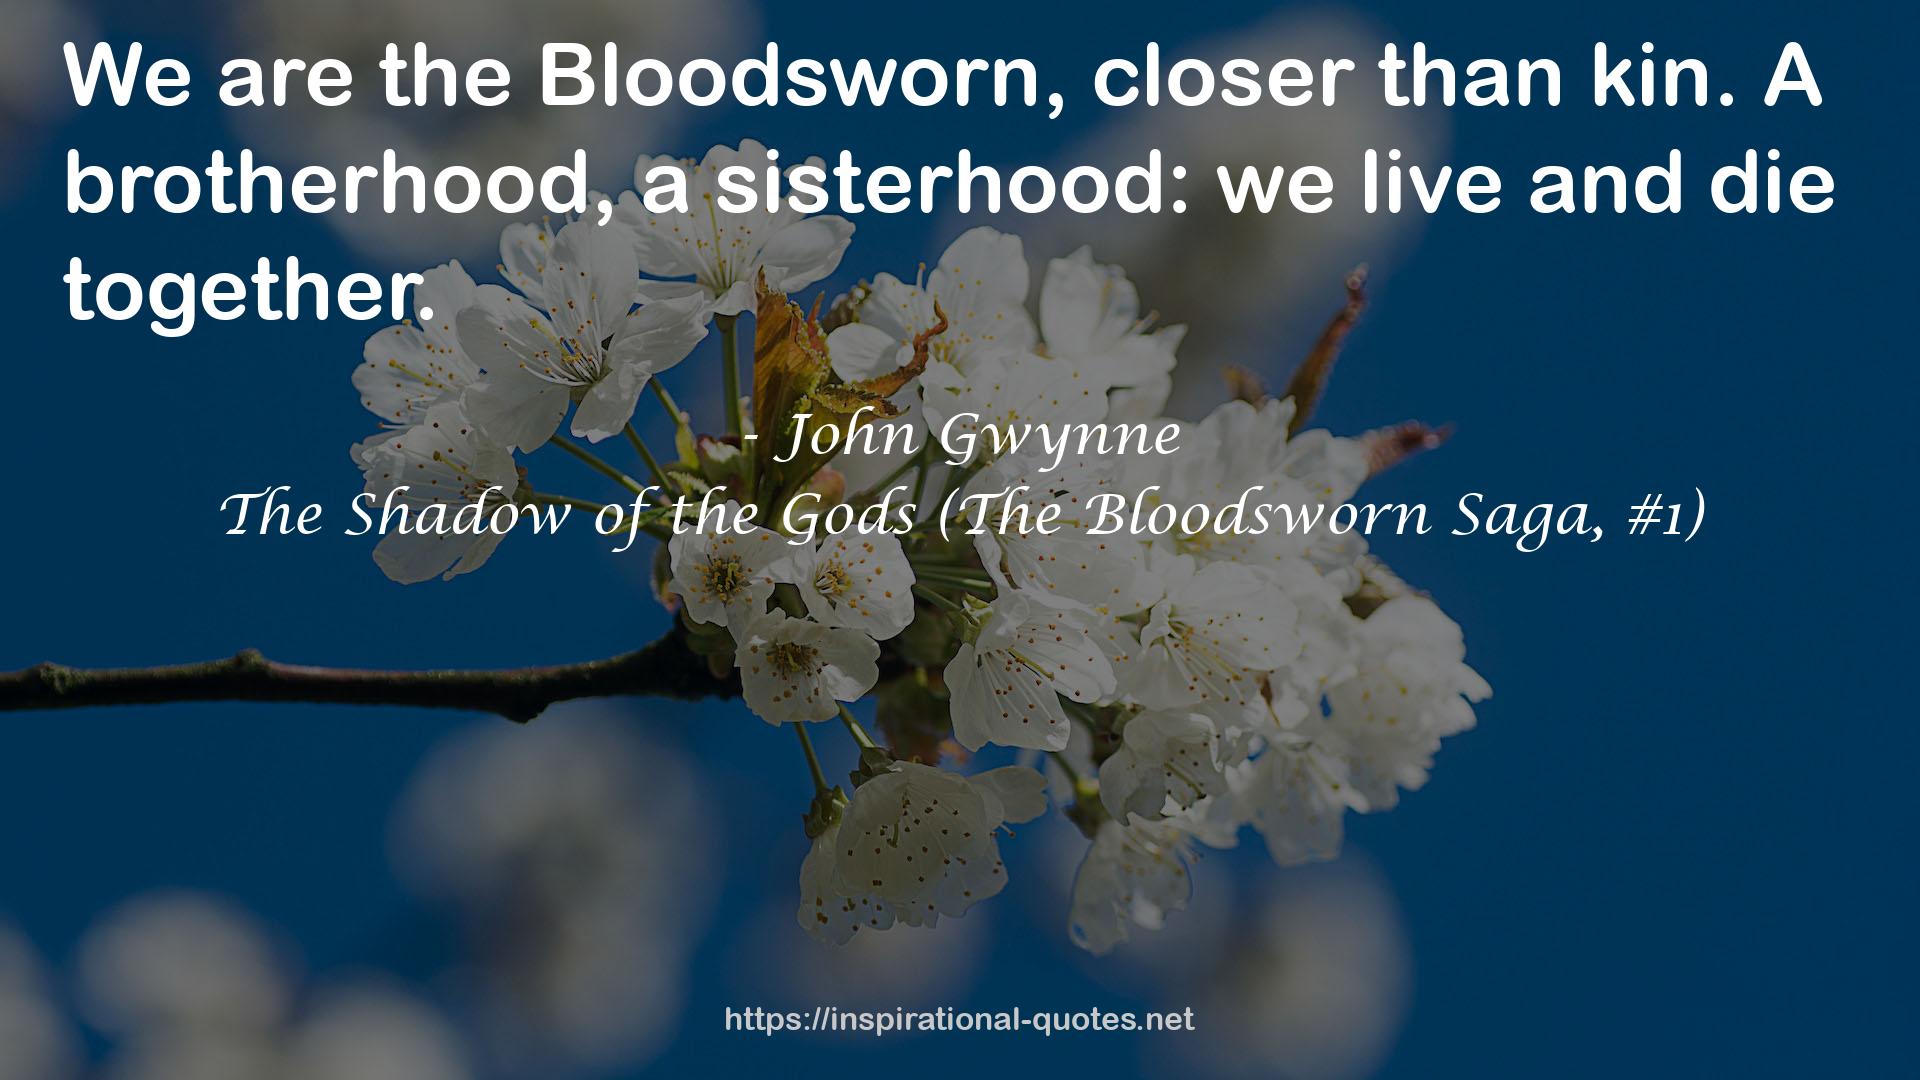 The Shadow of the Gods (The Bloodsworn Saga, #1) QUOTES